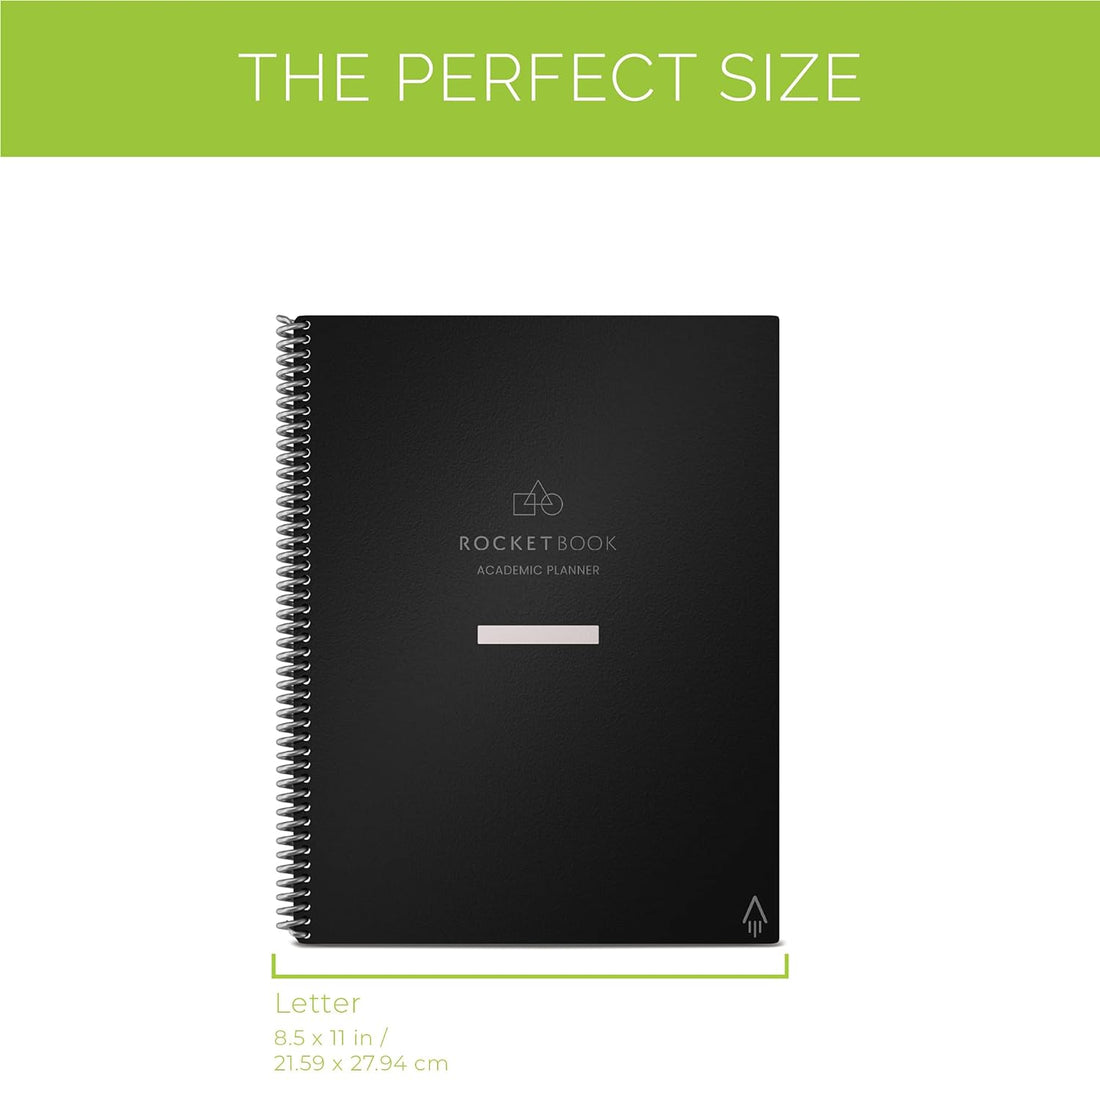 Rocketbook Reusable Academic Planner for Students and Teachers, Includes 13 page types, Black Cover, Letter Size